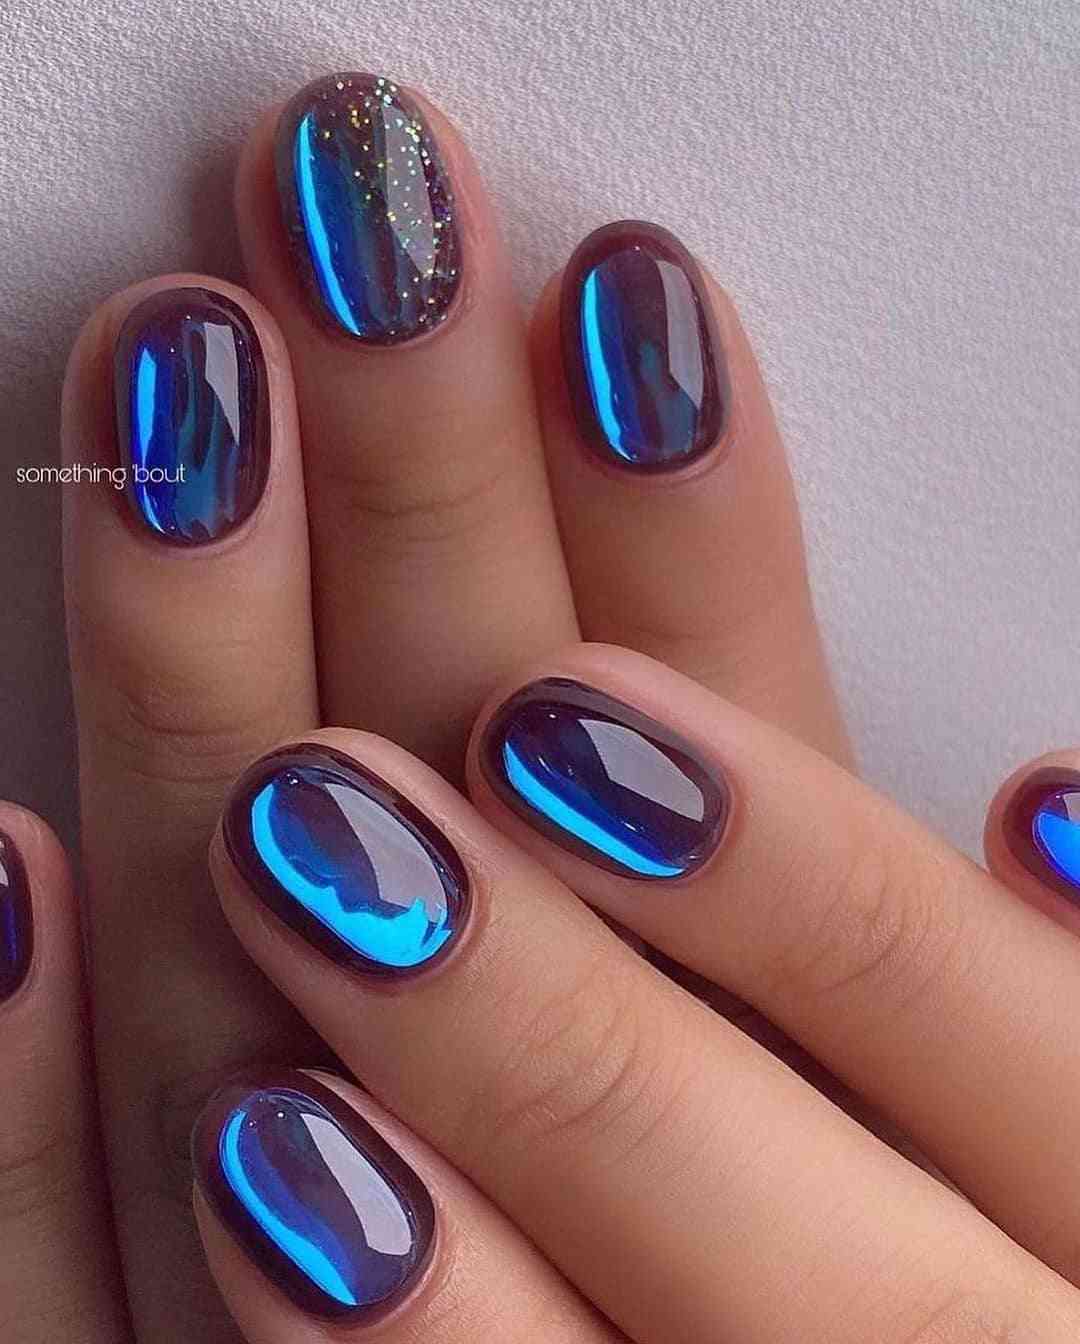 The 100+ Best Nail Designs Trends And Ideas In 2021 images 82